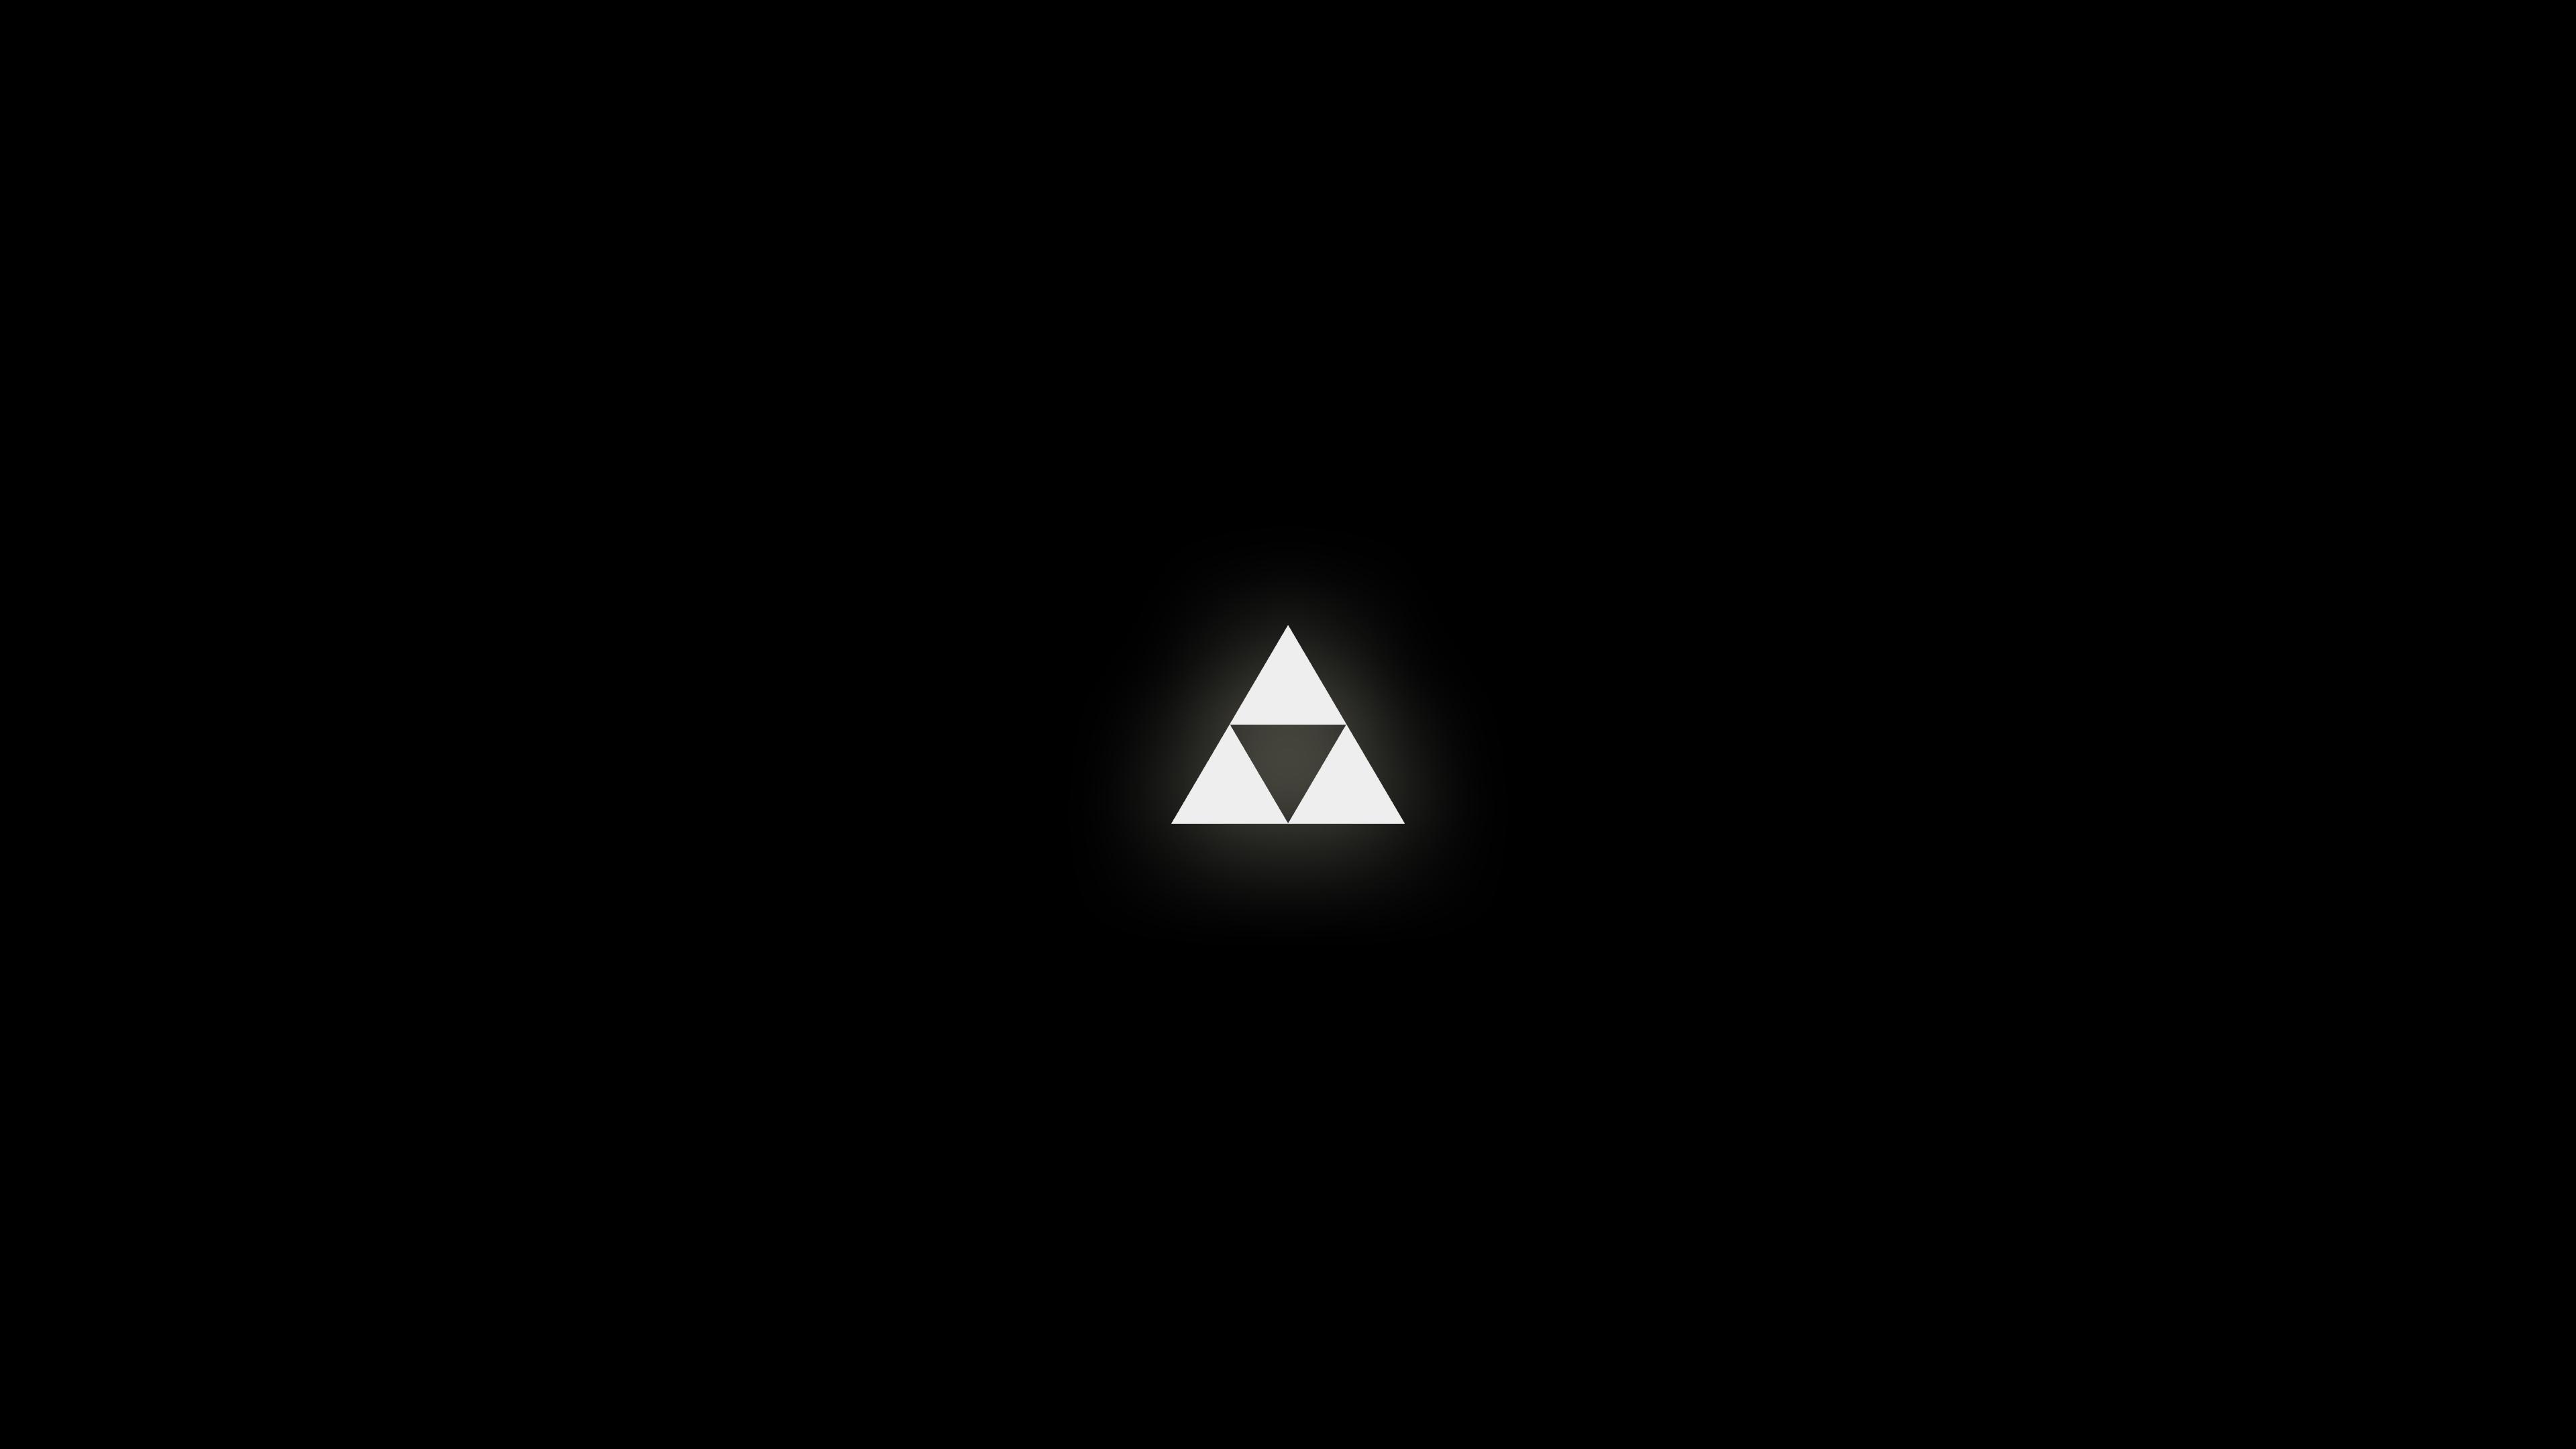 ALL I made this minimalistic Triforce 4k wallpaper you like it